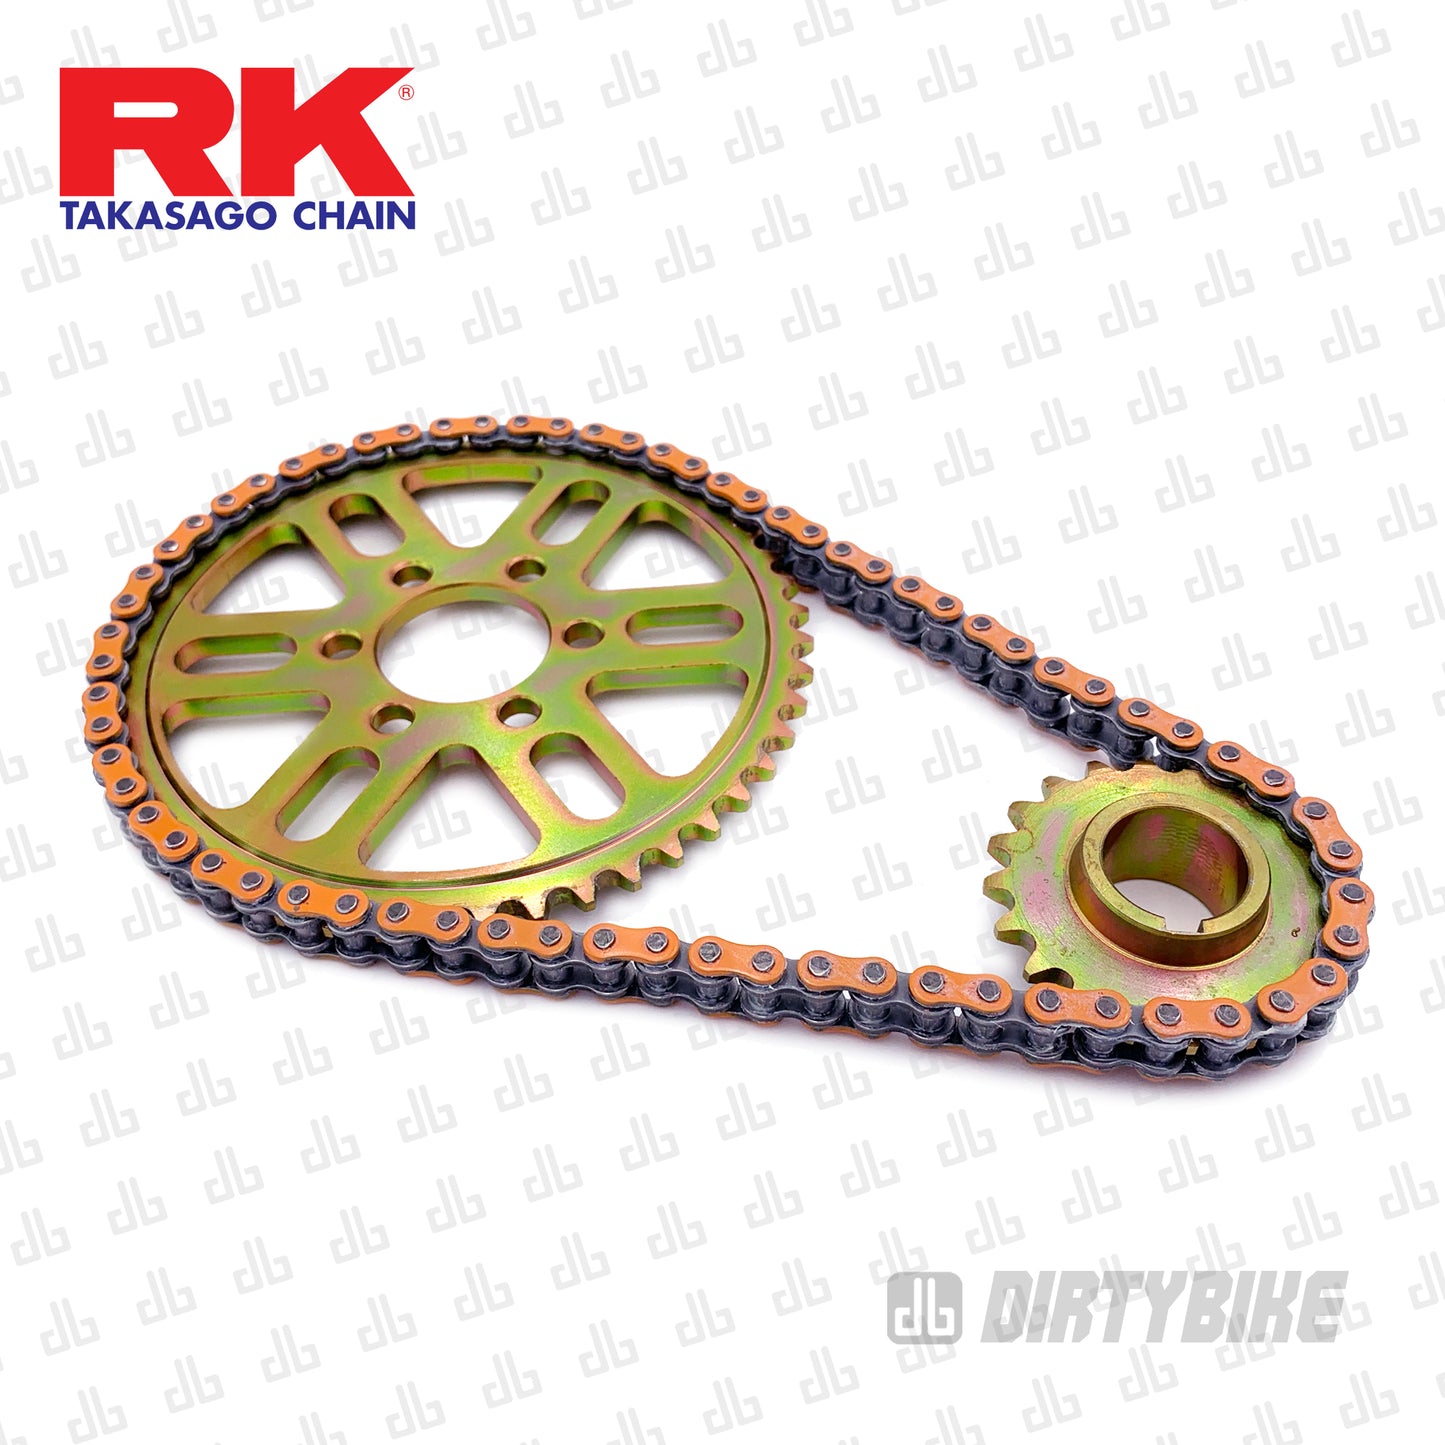 219RK Sealed O-Ring Chain Gold Series Primary Belt to Chain Conversion Kit Surron LBX